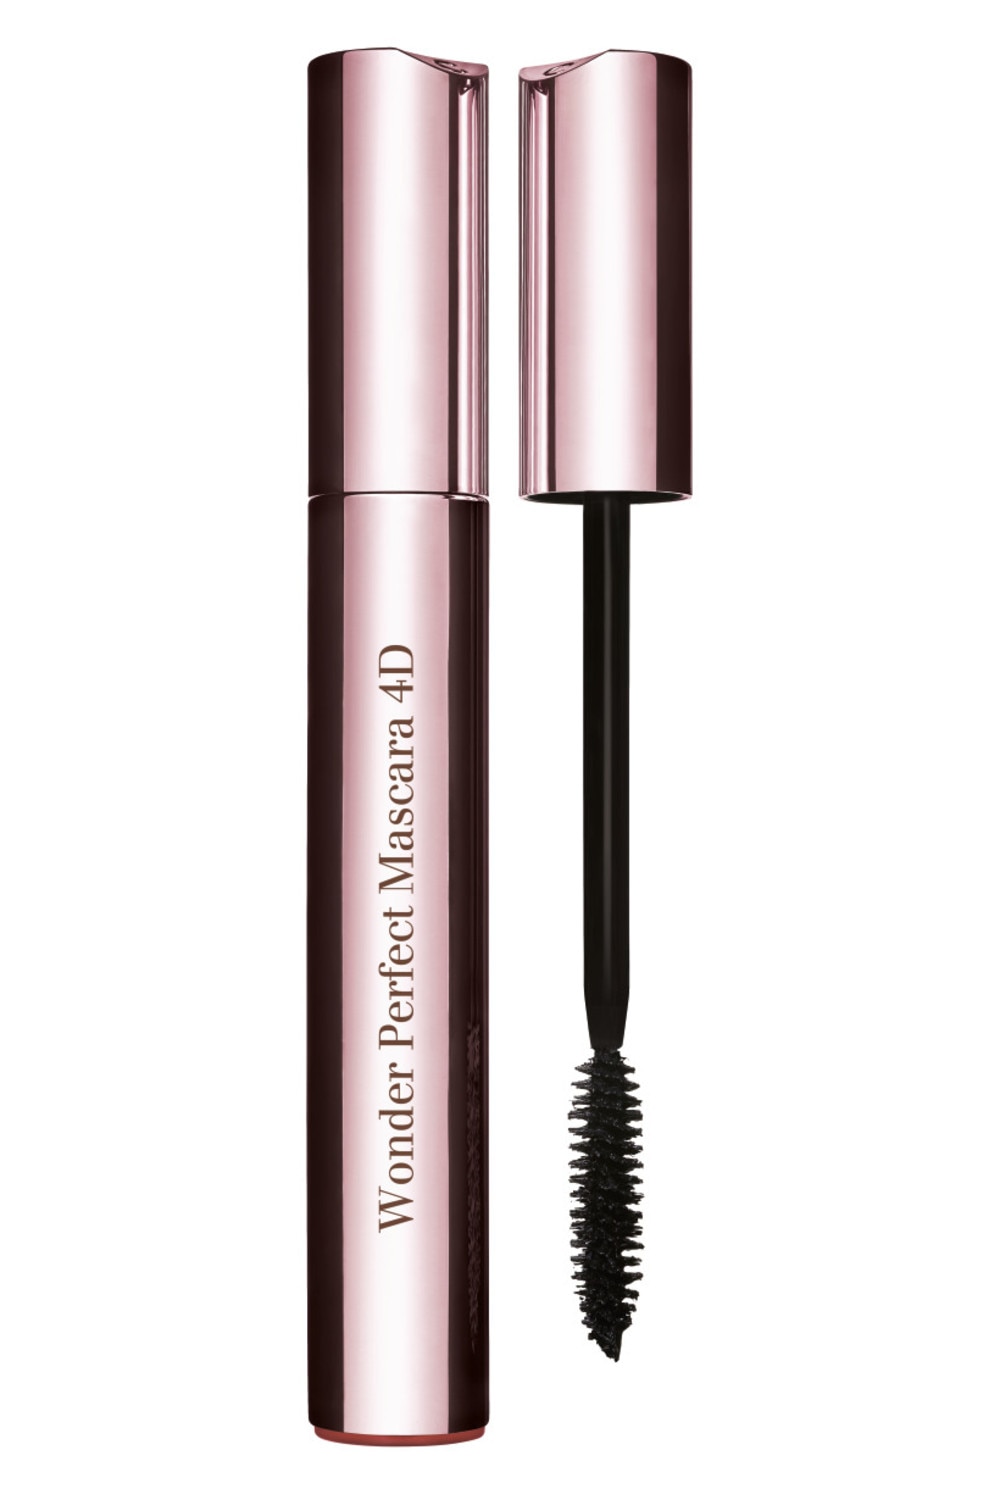 If you only apply one item of make-up at the moment, make it this mascara from Clarins. Picture: Supplied